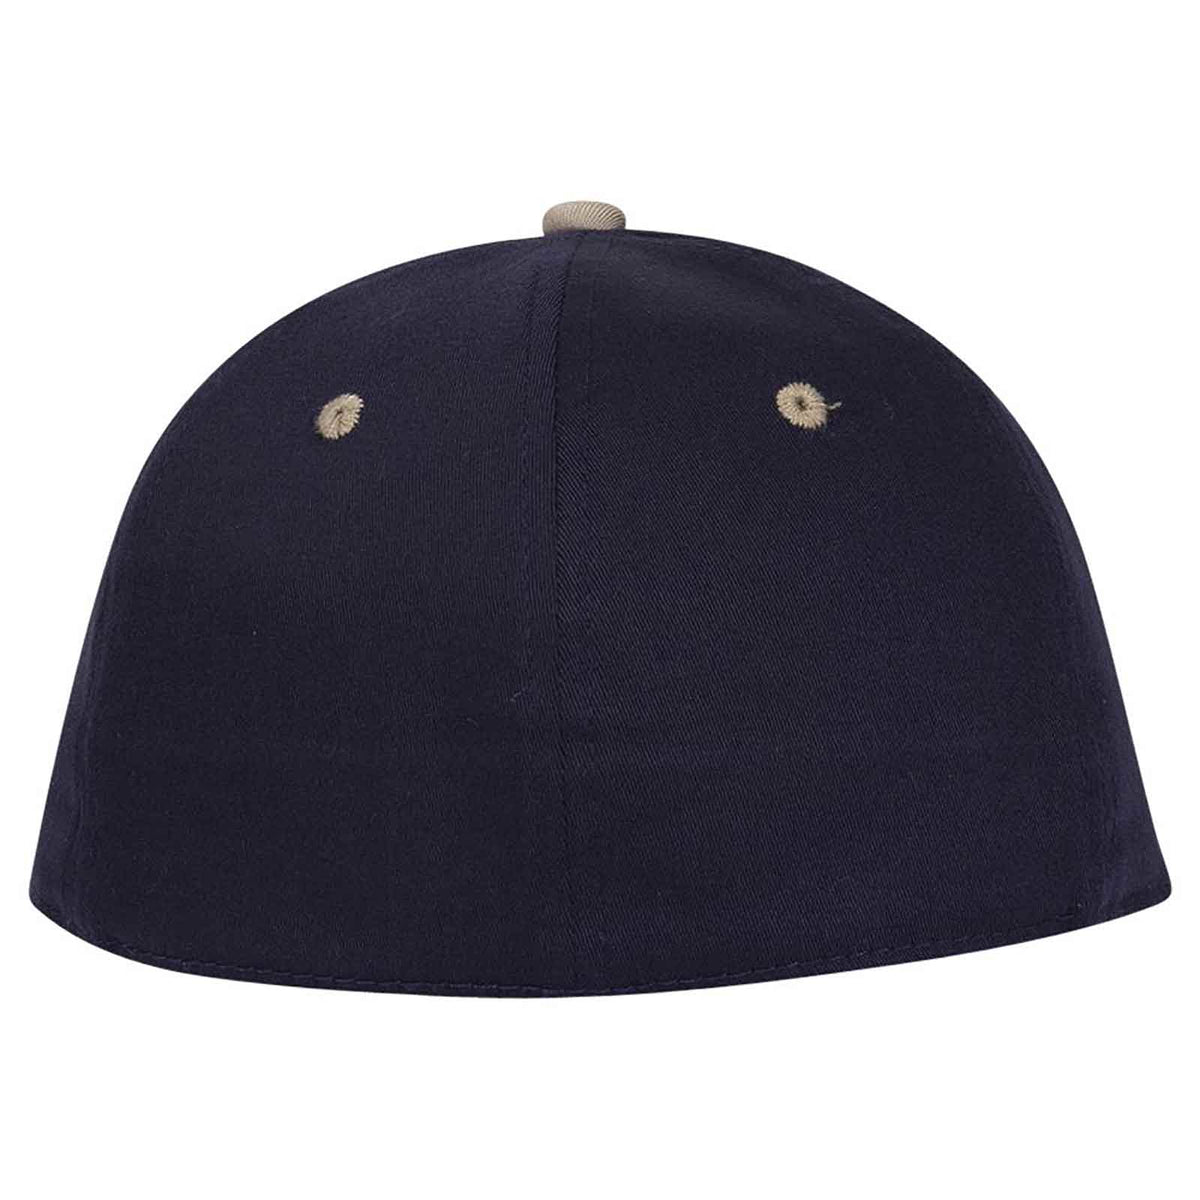 OTTO 12-267 Stretchable Deluxe Brushed Cotton Twill Sandwich Visor Low Profile Pro Style Cap S/M - Khaki Navy Navy - HIT a Double - 2